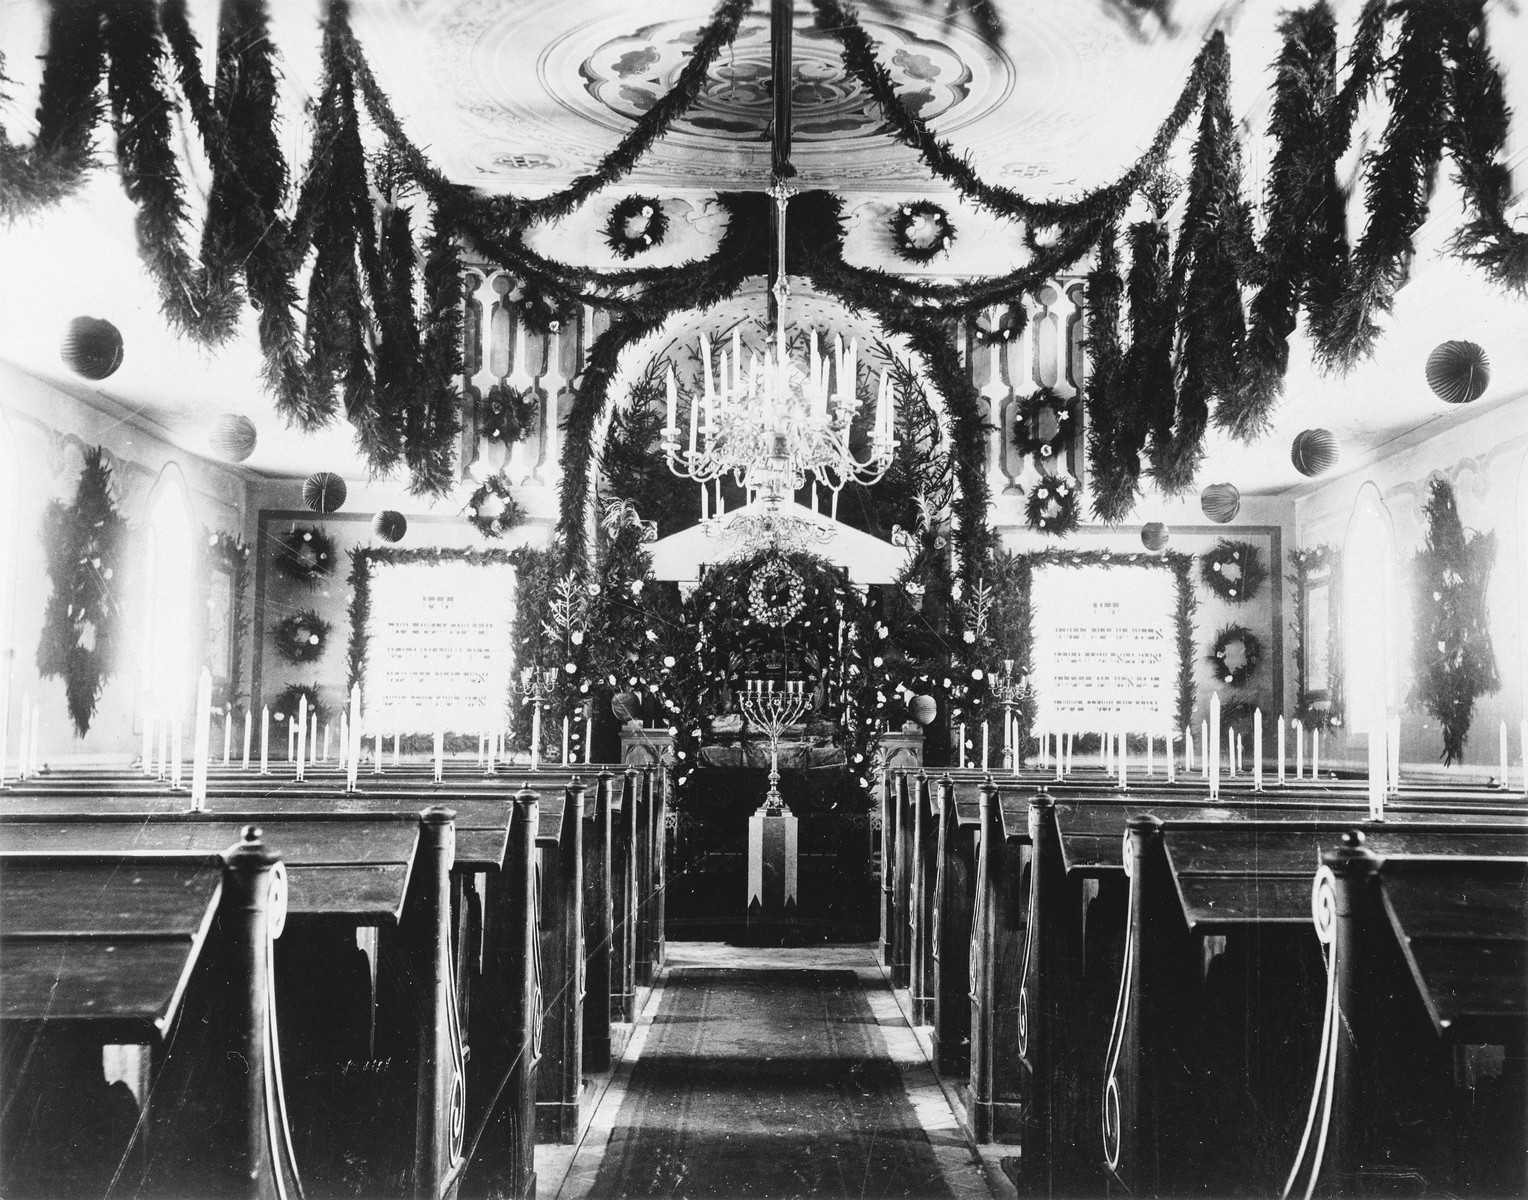 View of the sanctuary in the Buttenwiesen synagogue that is decorated with evergreens.

The synagogue in Buttenwiesen was not destroyed during Kristallnacht.  After the war it was converted into a school and later used for other purposes.